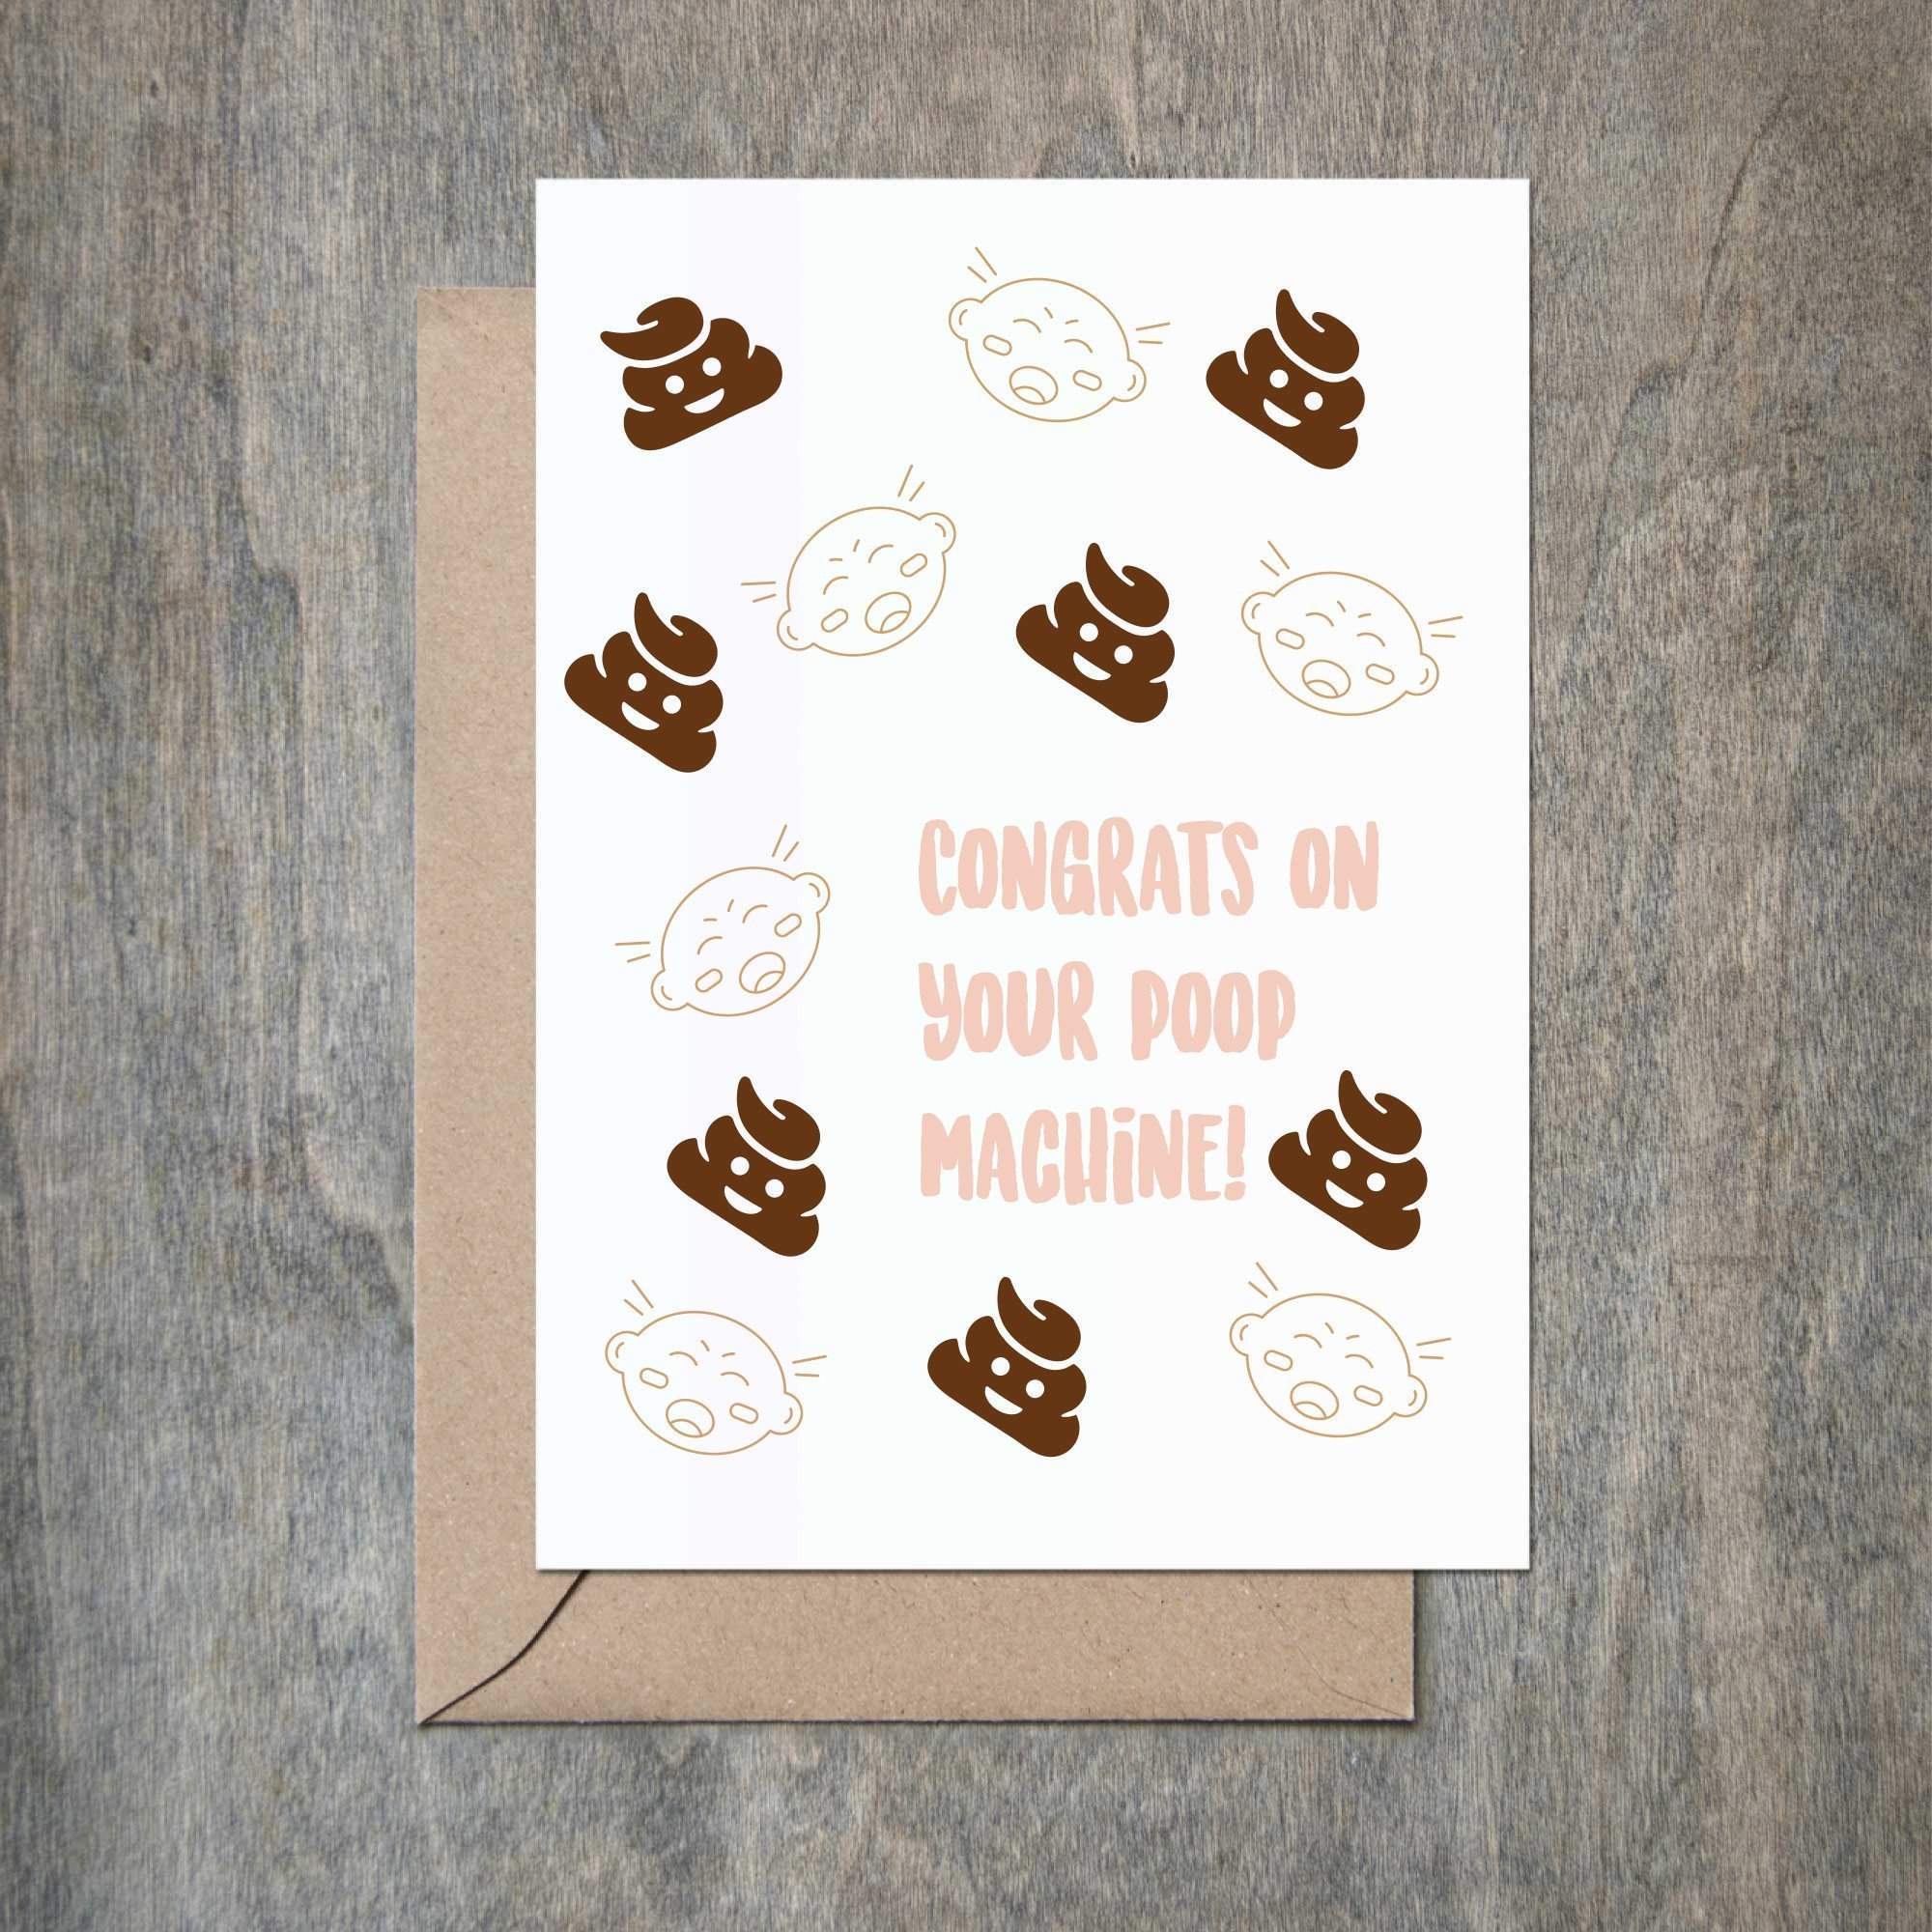 Full Size of Baby Shower:graceful Baby Shower Cards Image Designs Baby Shower Congratulations With Baby Shower Evites Plus Baby Shower Gifts For Boys Together With Baby Shower Souvenirs As Well As Diy Baby Shower Gifts